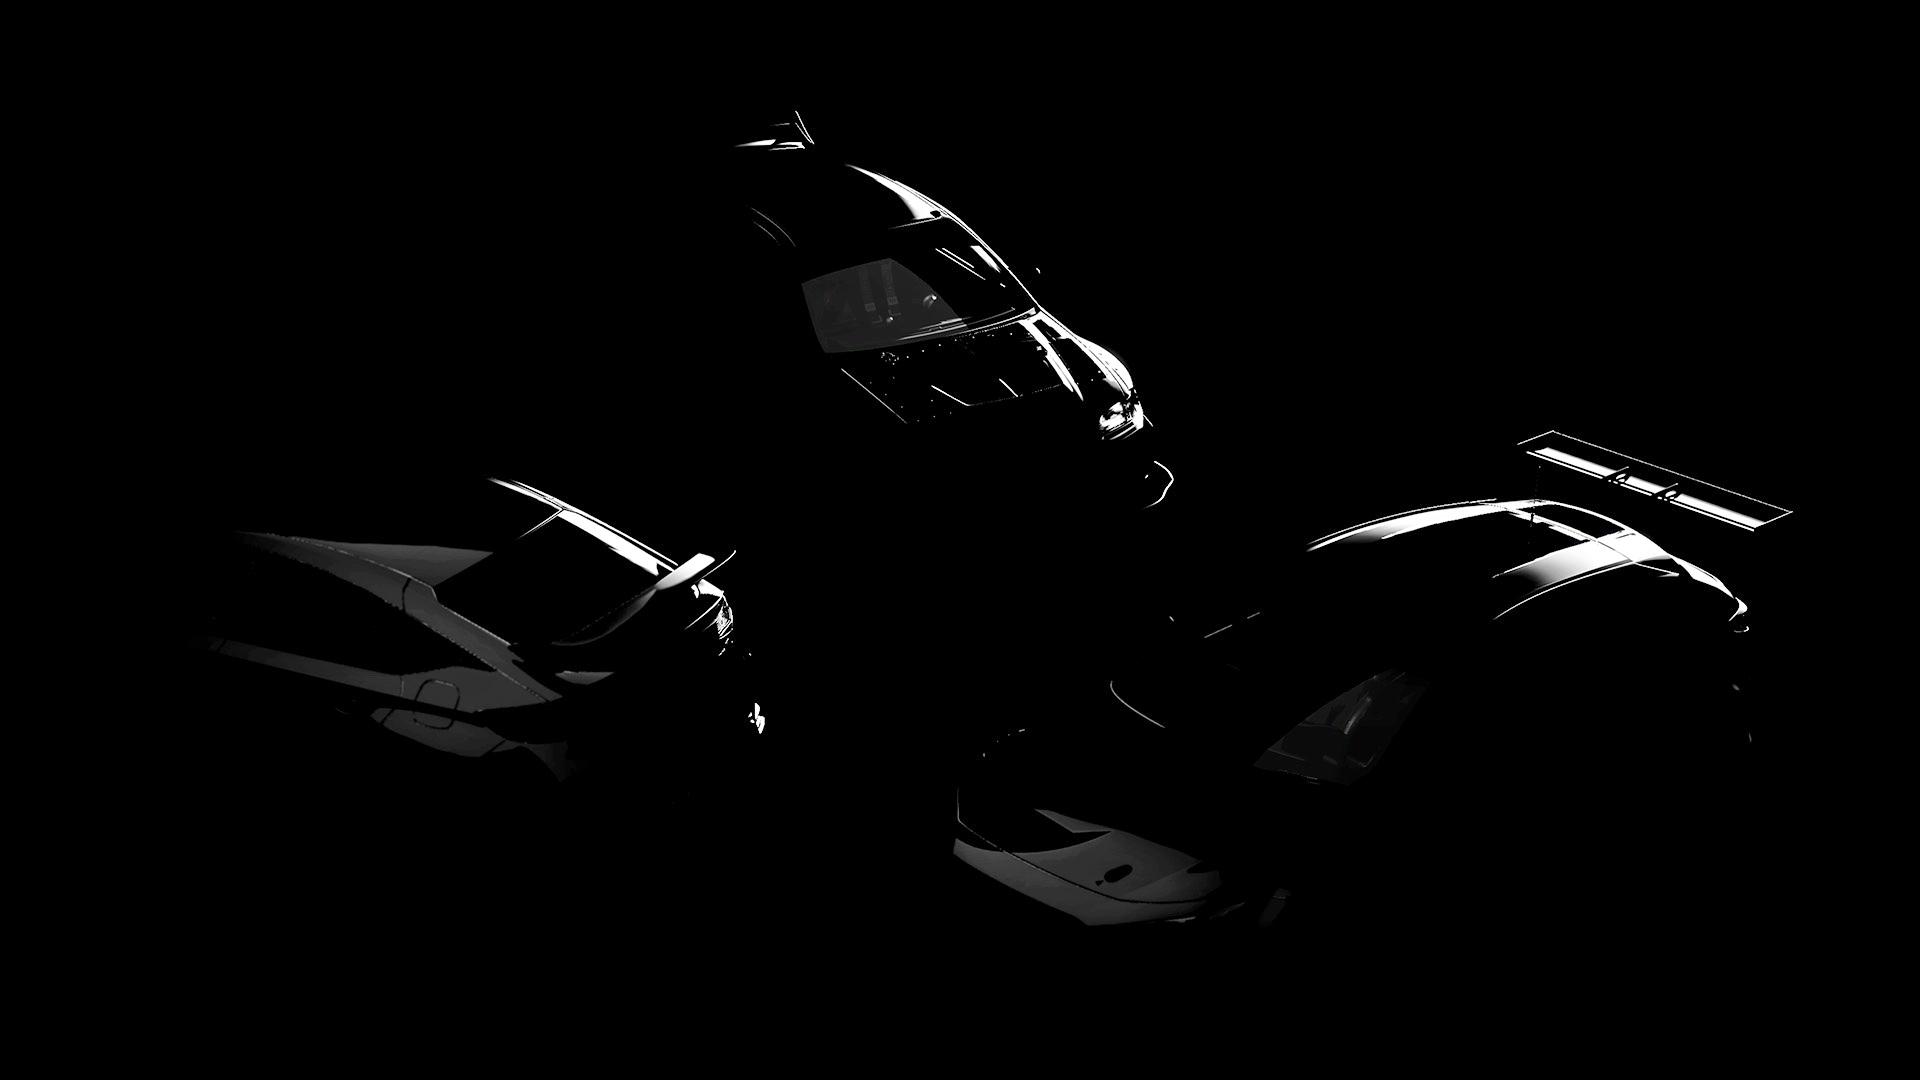 Gran Turismo 7: 3 Brand New Cars Coming Soon - BoxThisLap